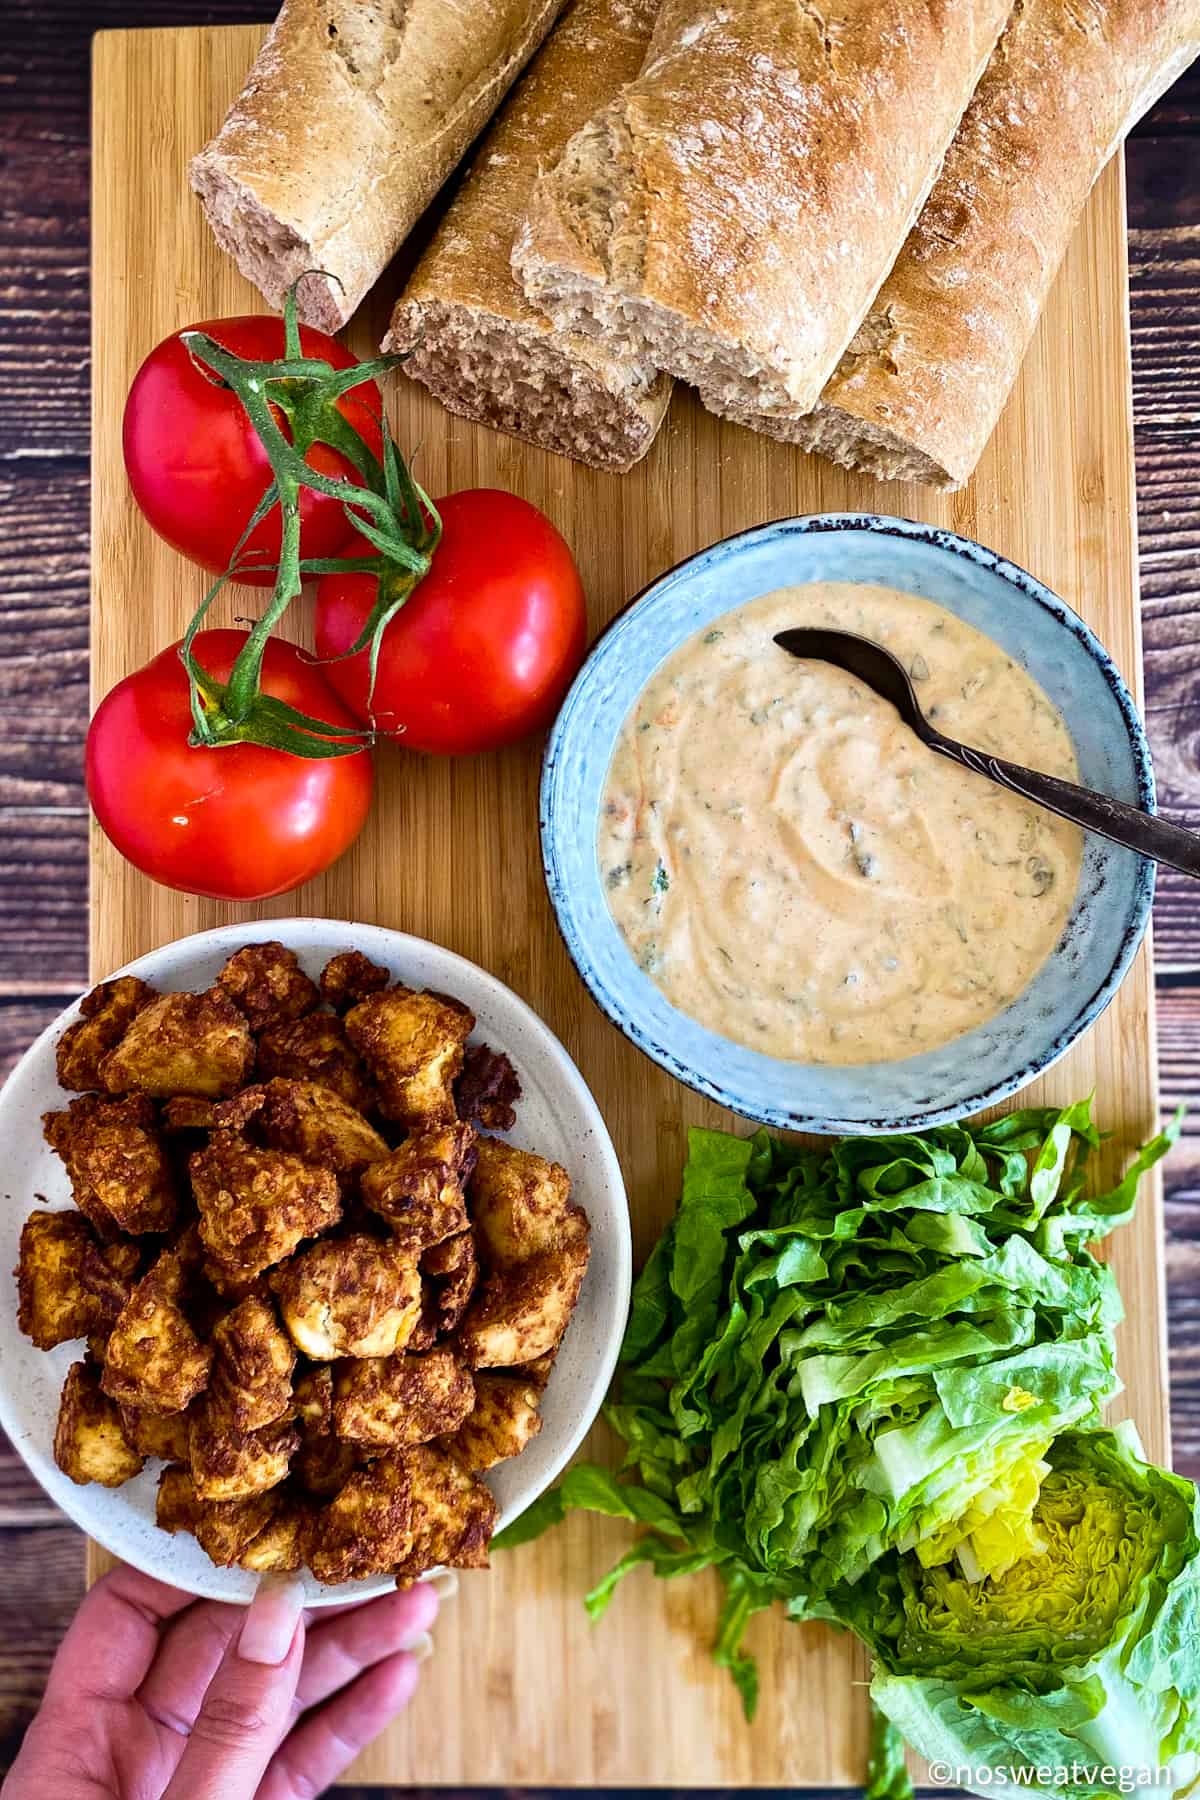 Ingredients to make a vegan po boy: Bread, tomatoes, remoulade, tofu, and lettuce.